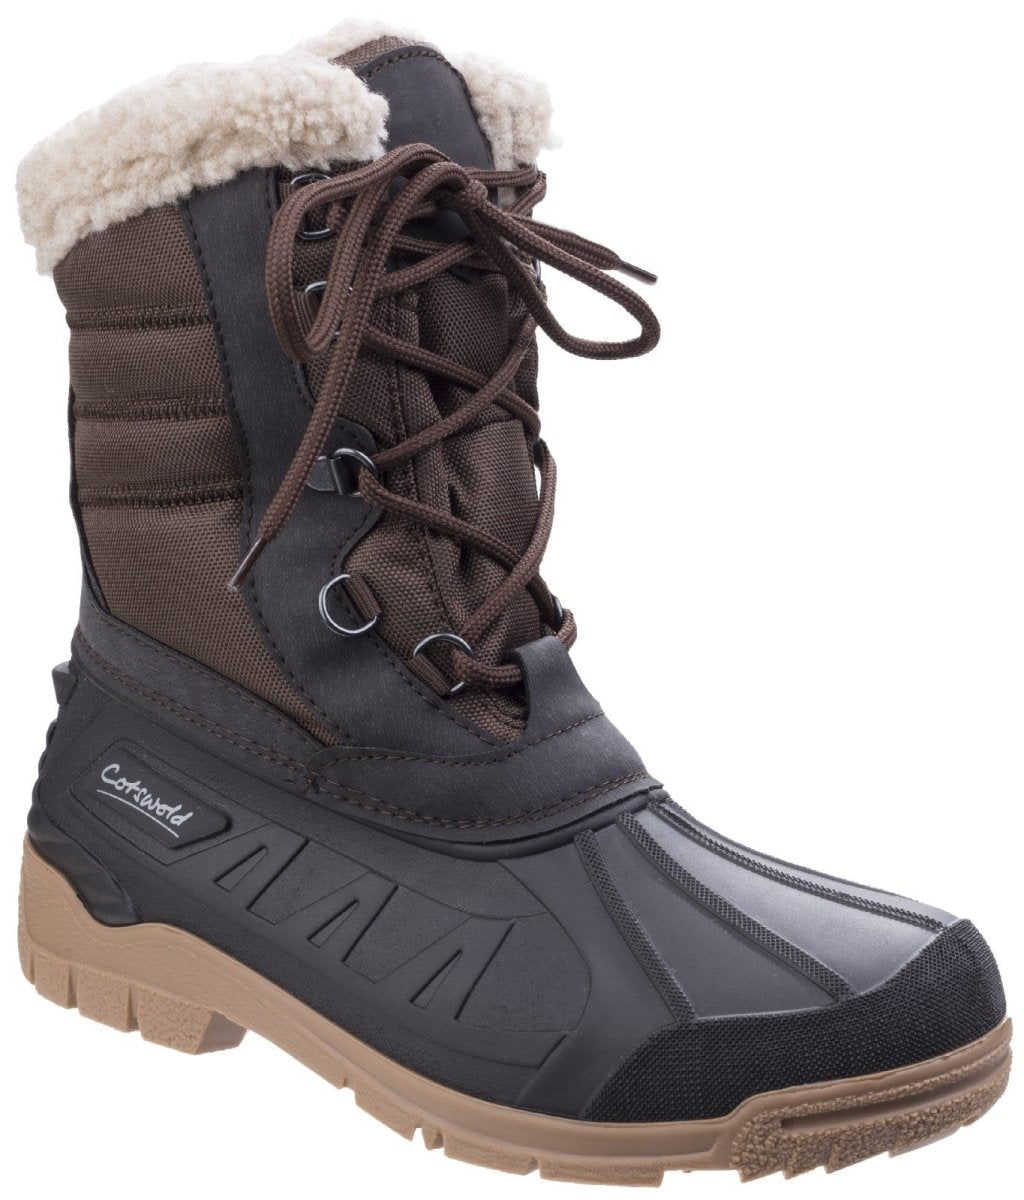 Cotswold Coset Ladies Weather Wellingtons - Shoe Store Direct